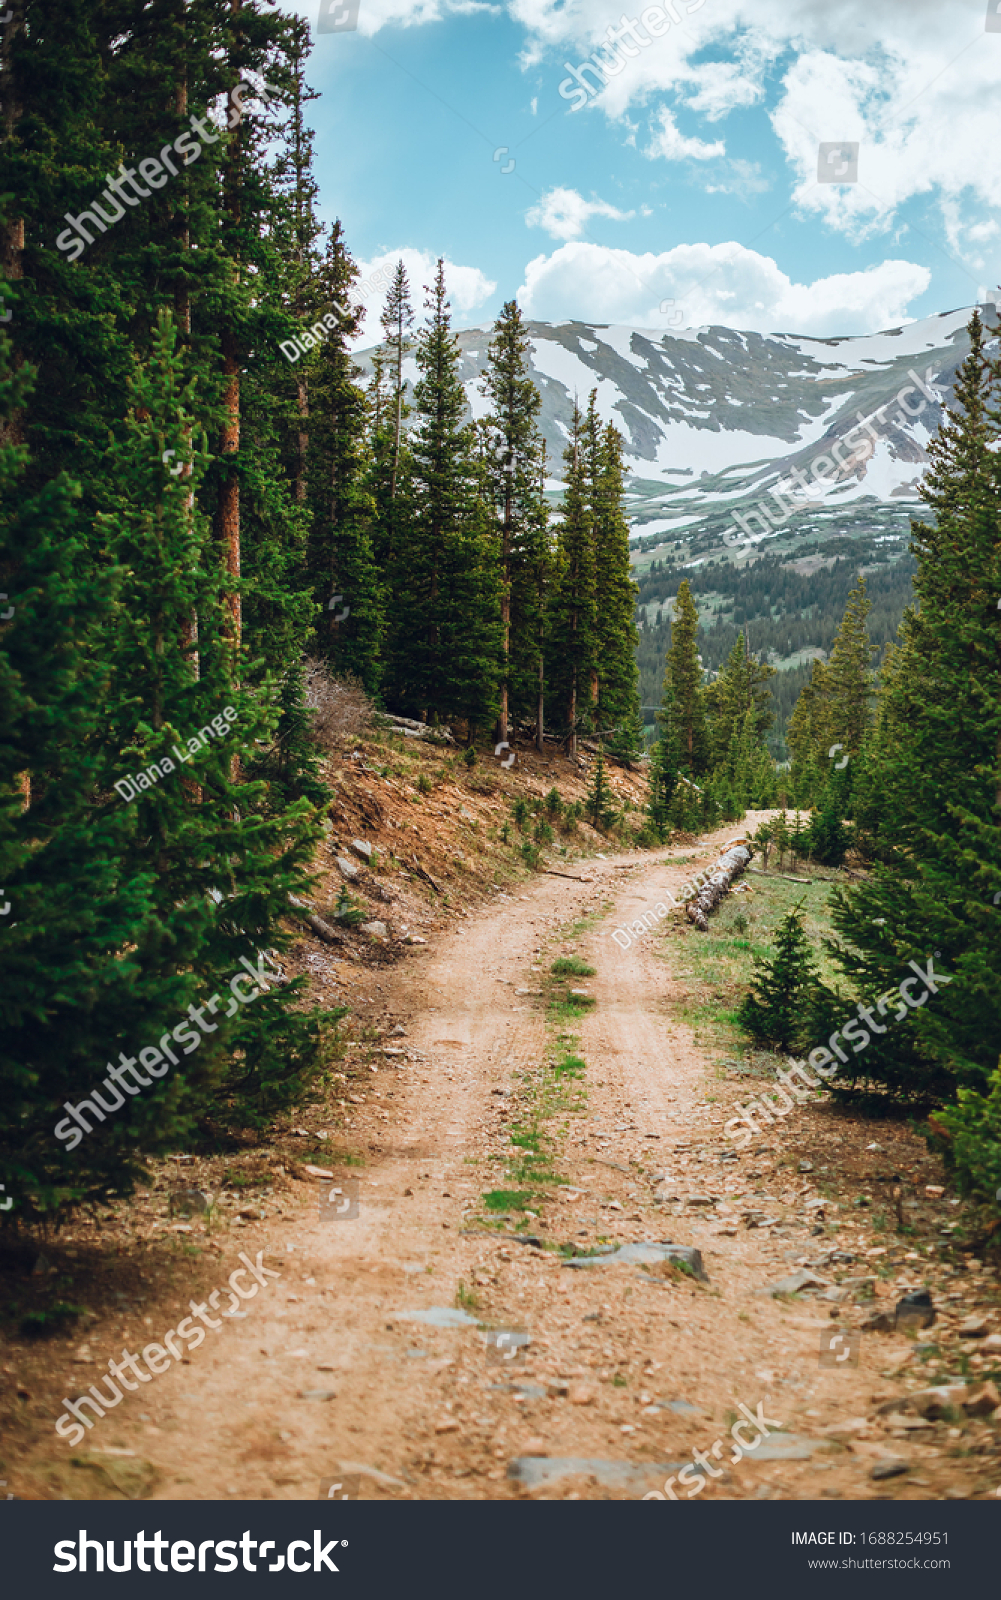 Mountain trail for four wheeling. Colorado mountains and the pine trees. Off road landscape. Dirt trail for off roading in Colorado. #1688254951